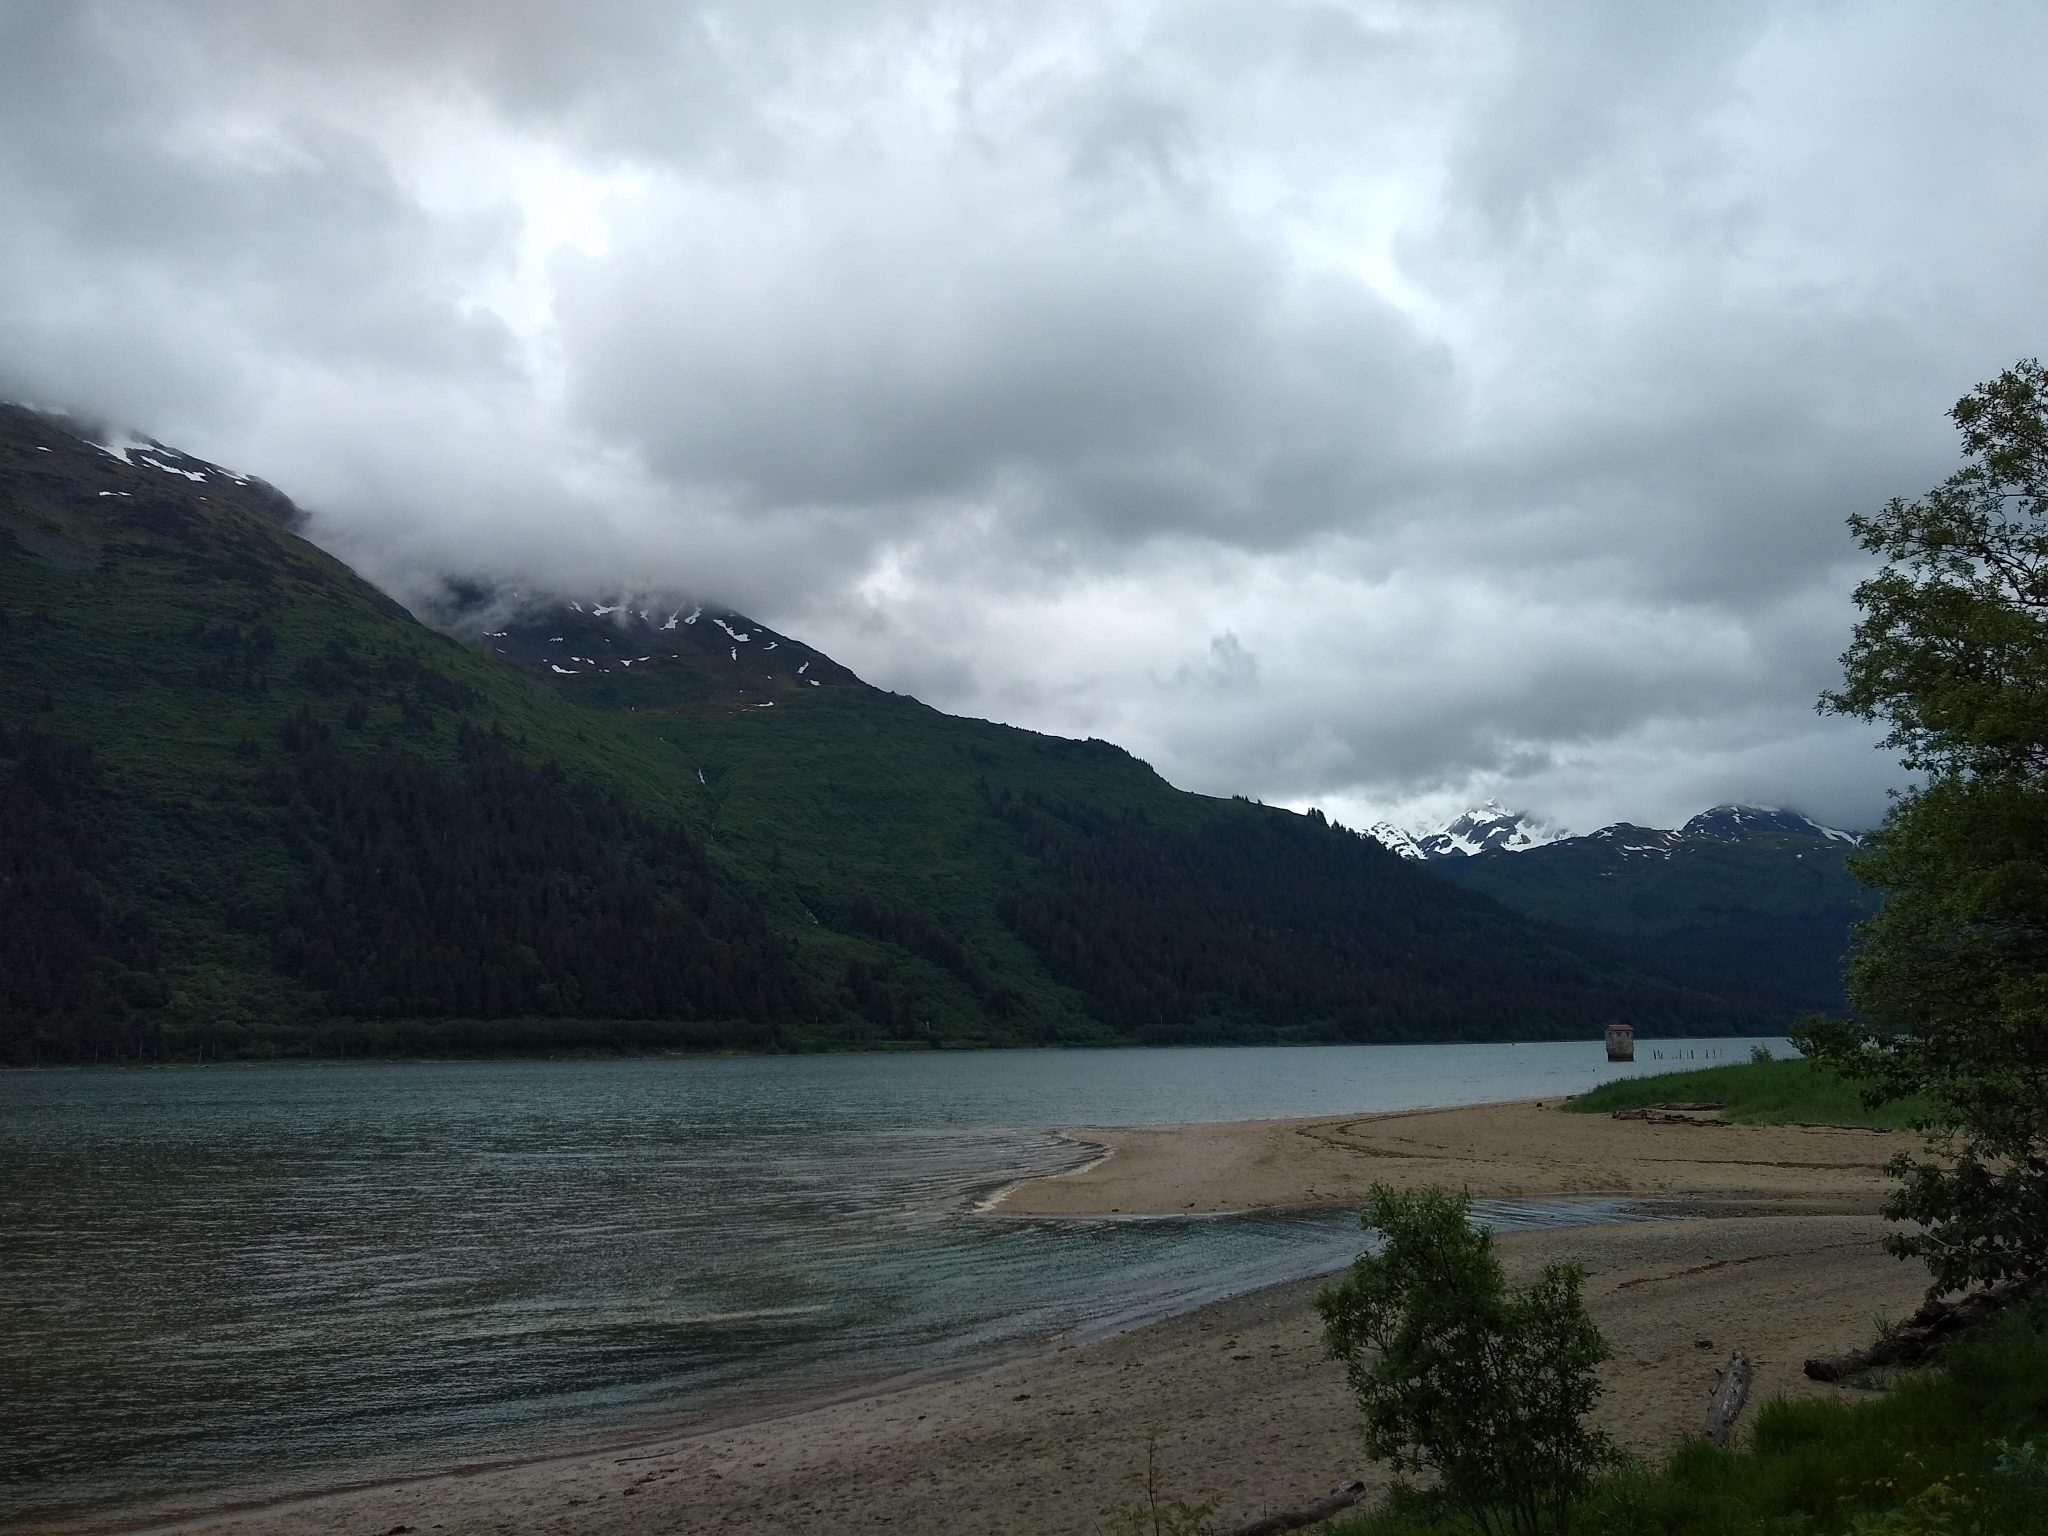 Forested mountains covered in clouds across a narrow body of water. In the foreground is a sandy beach with some trees nearby